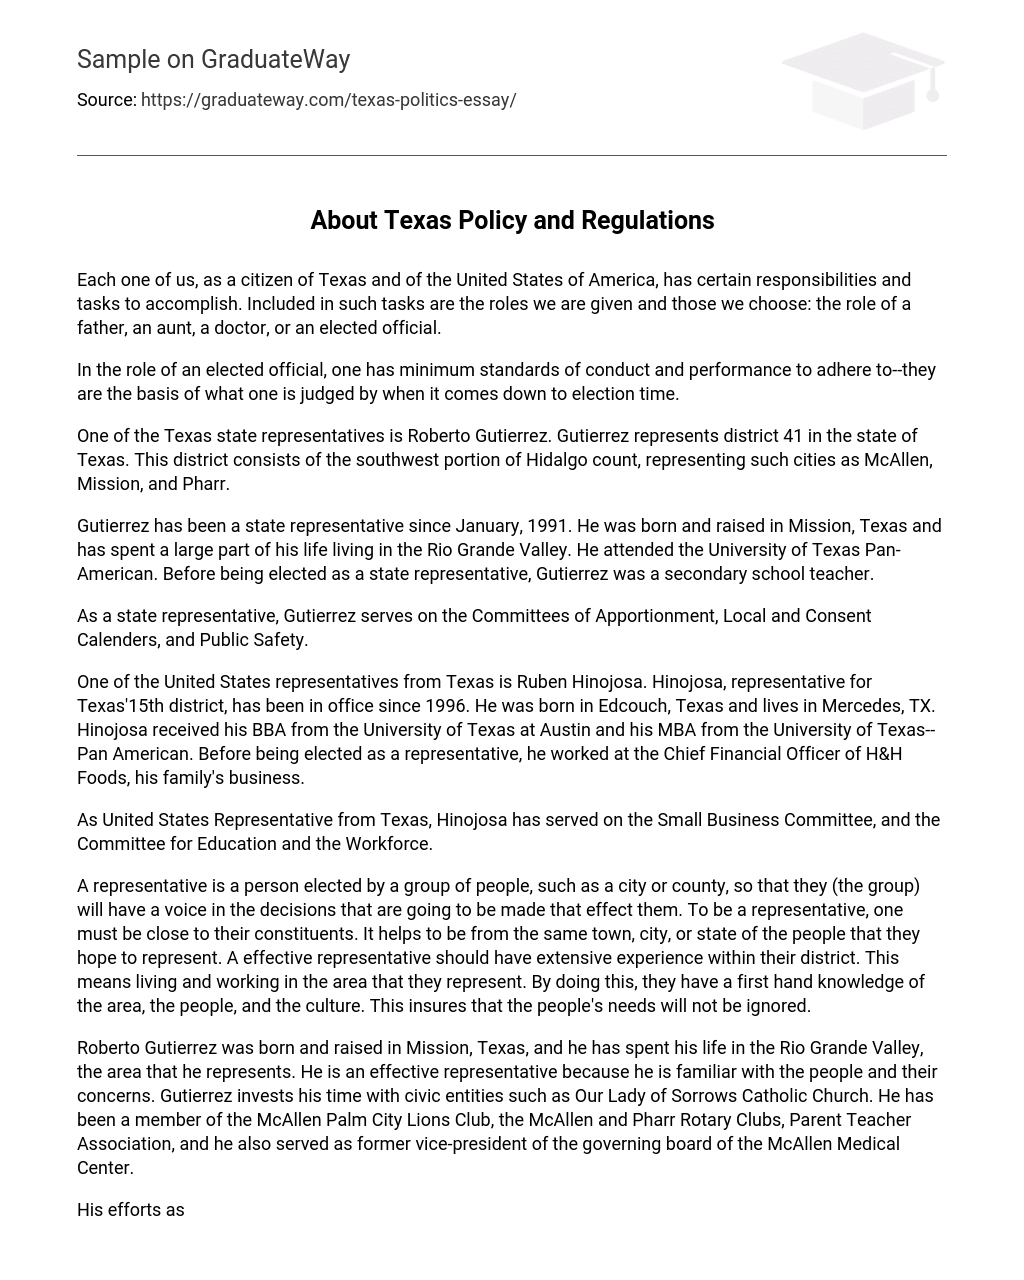 About Texas Policy and Regulations